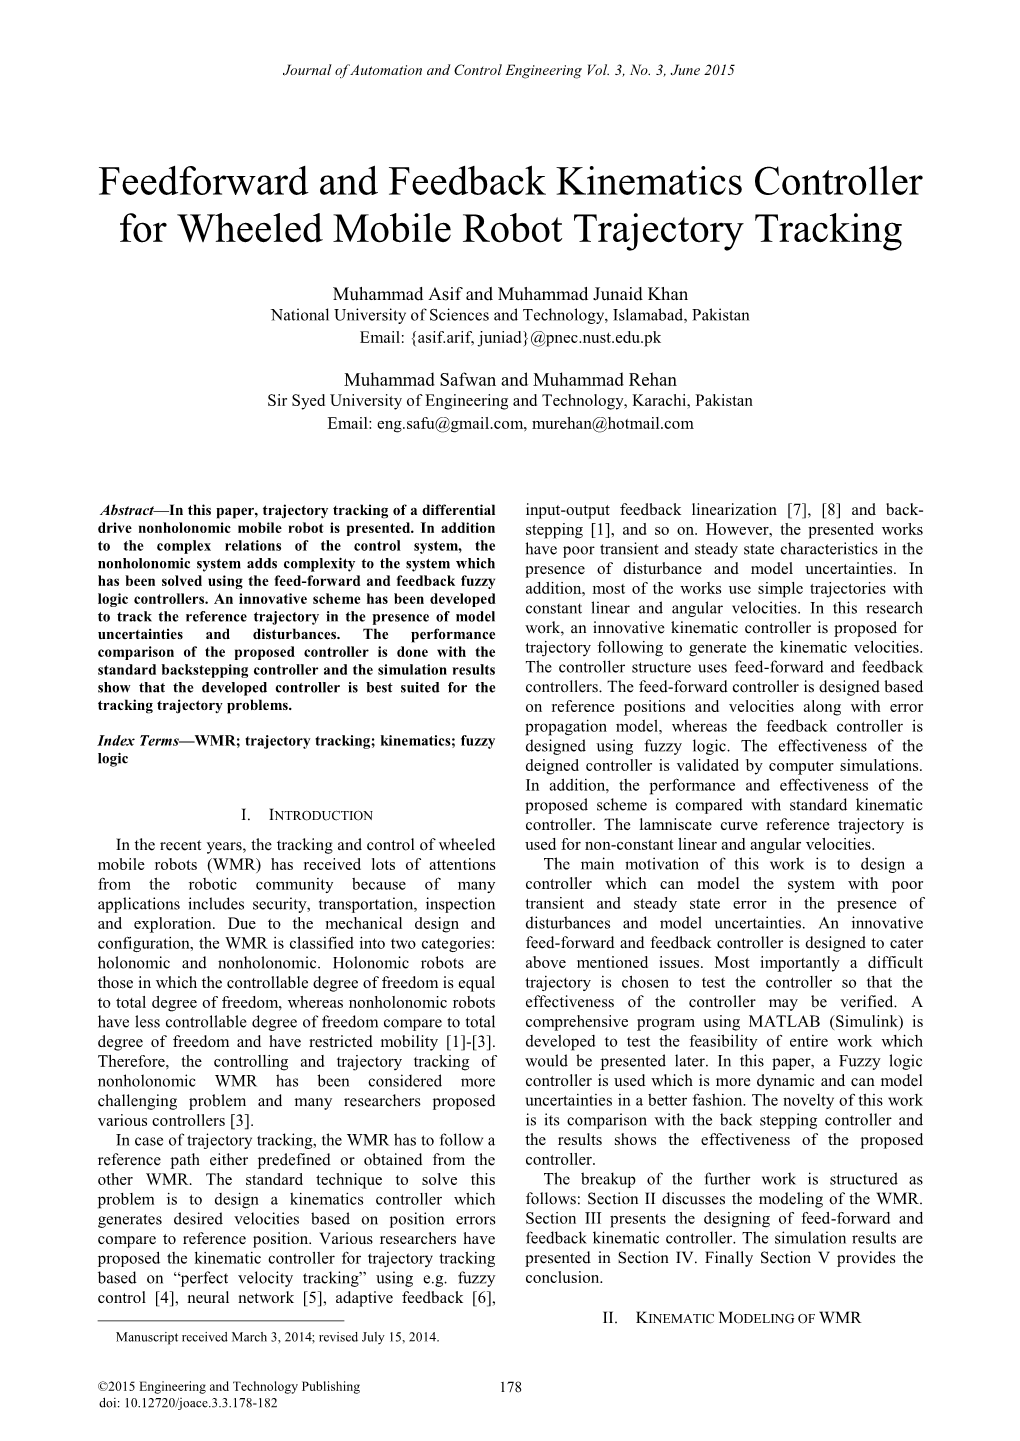 Feedforward and Feedback Kinematics Controller for Wheeled Mobile Robot Trajectory Tracking